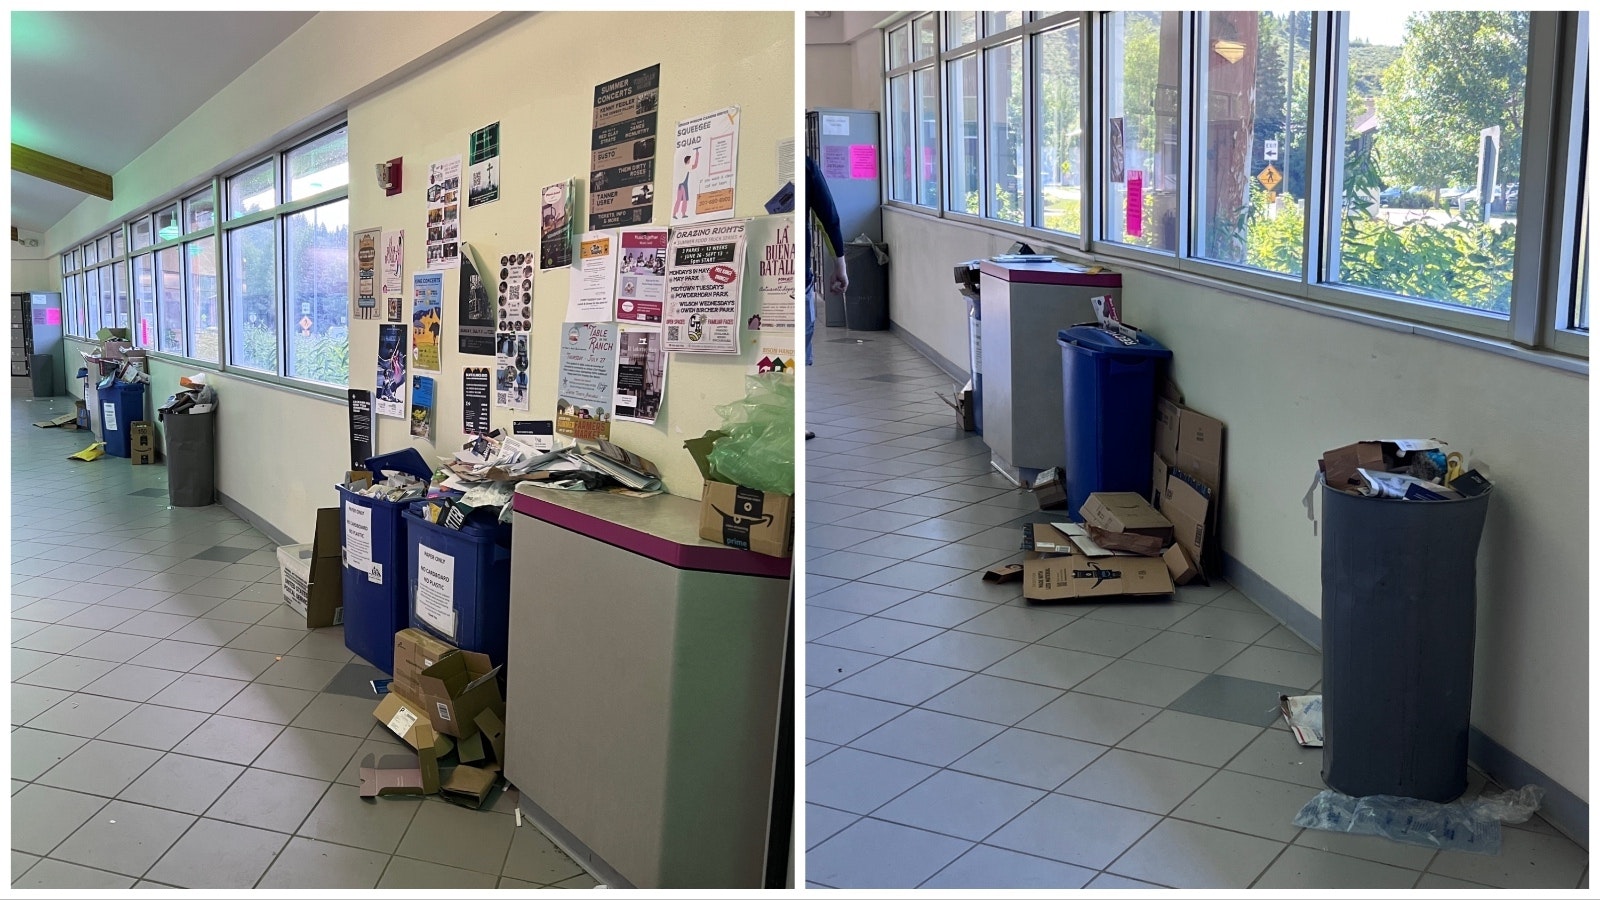 With so many people coming into the Maple Way post office in Jackson, and a serious lack of staff, trash has been a habitual problem.